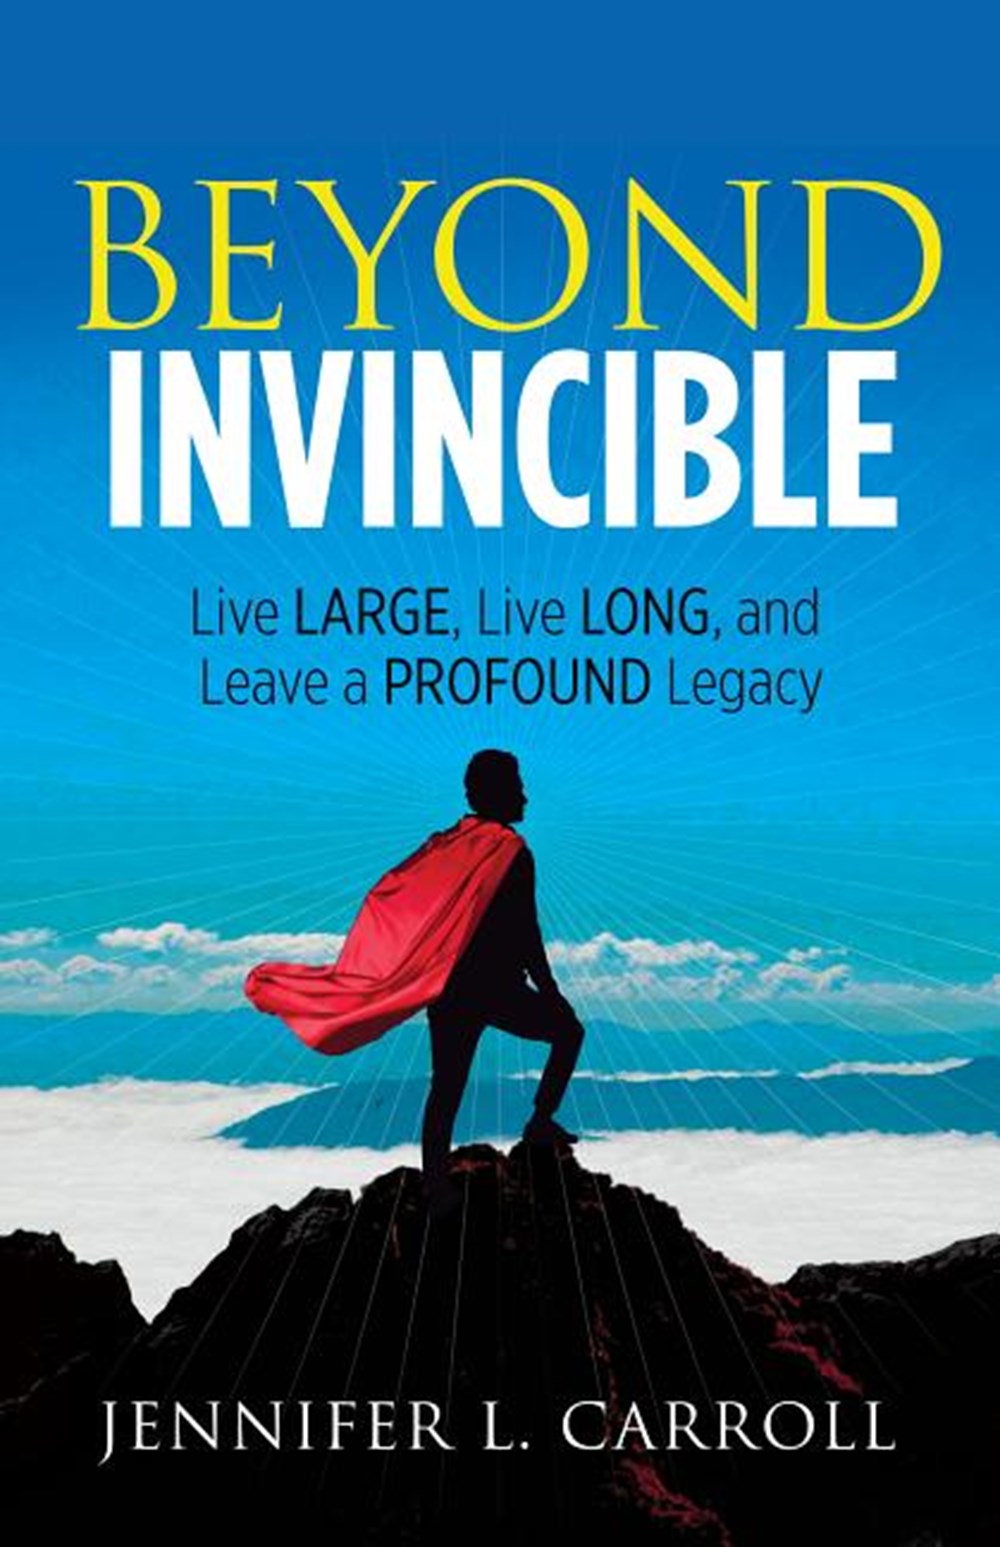 Beyond Invincible Live Large, Live Long and Leave a Profound Legacy